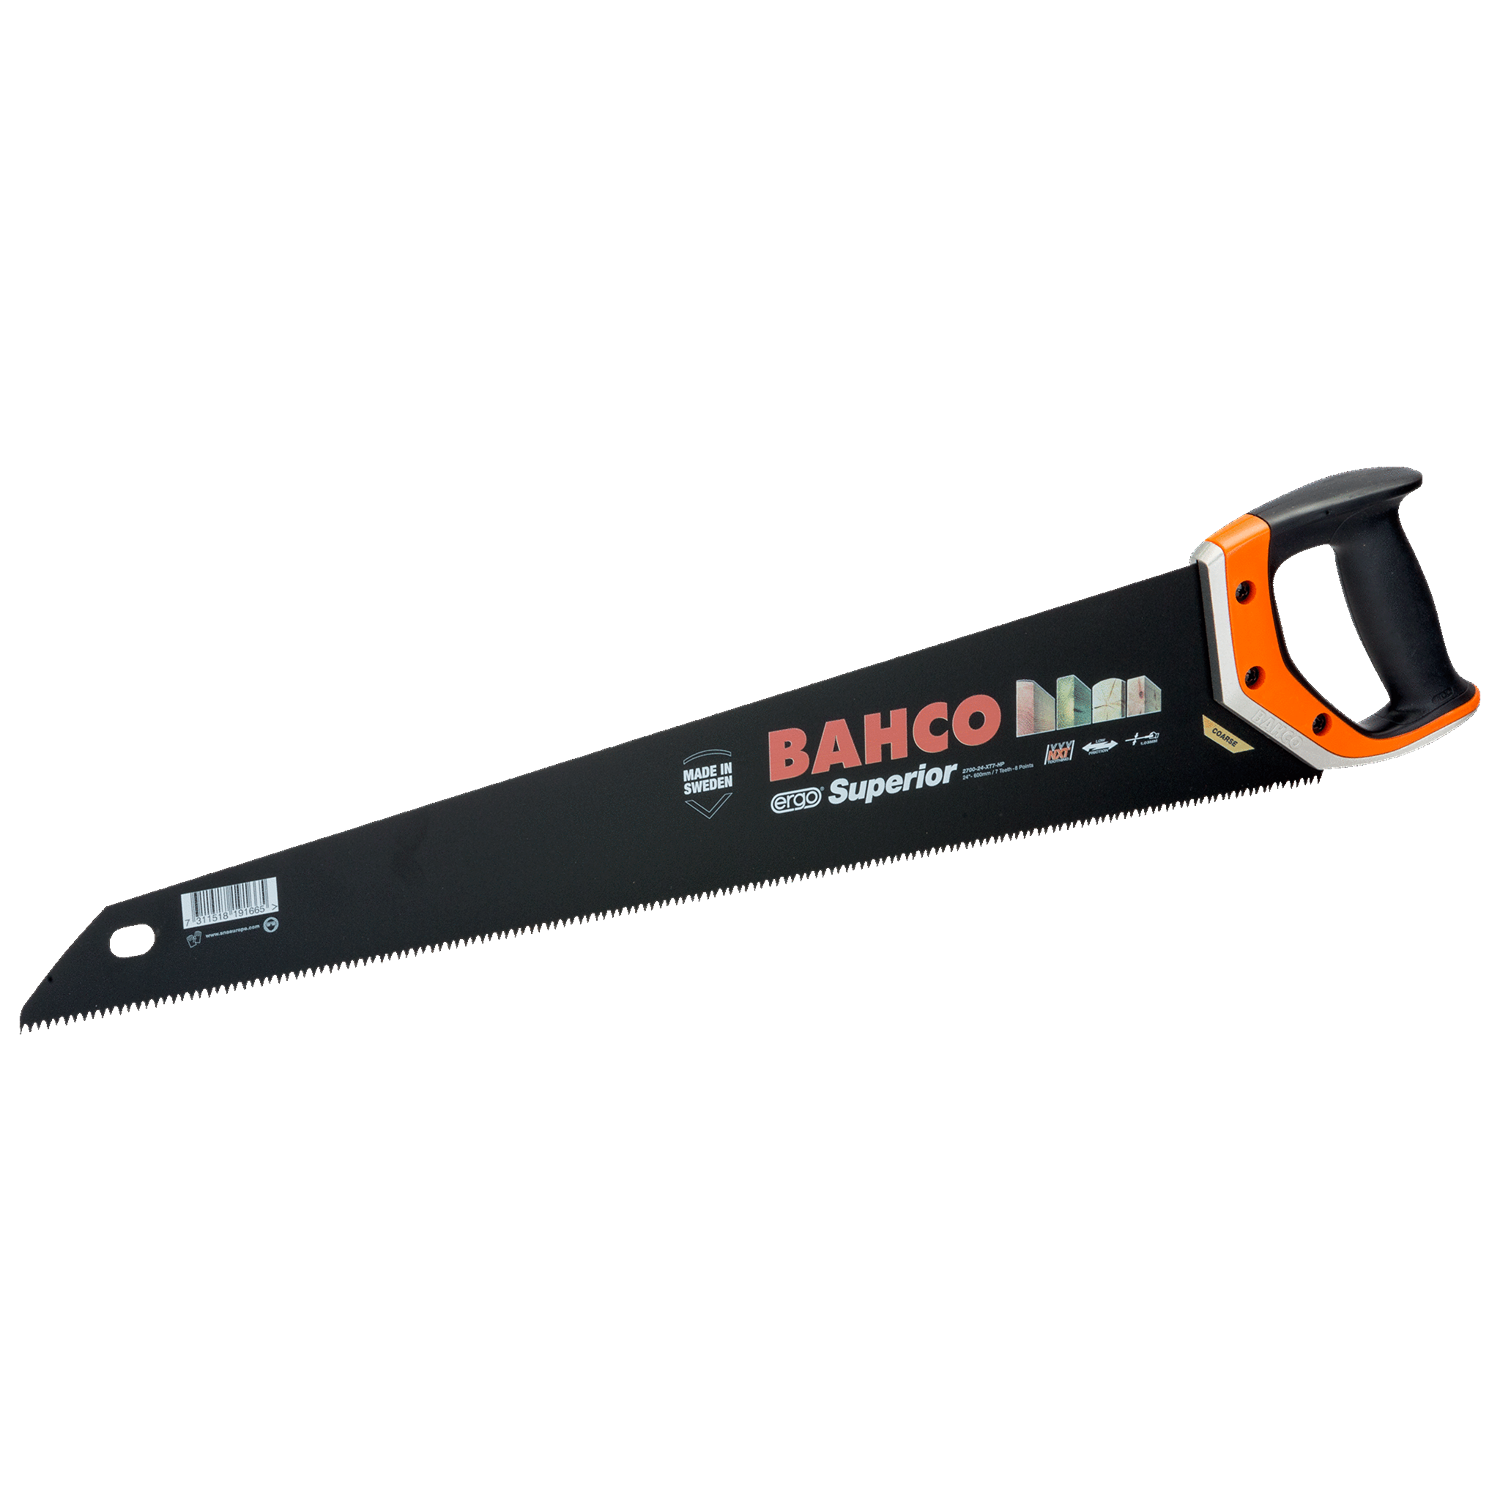 BAHCO 2700 ERGO Superior Handsaw for Tanalised Wood - 7"/8" - Premium Handsaw from BAHCO - Shop now at Yew Aik.